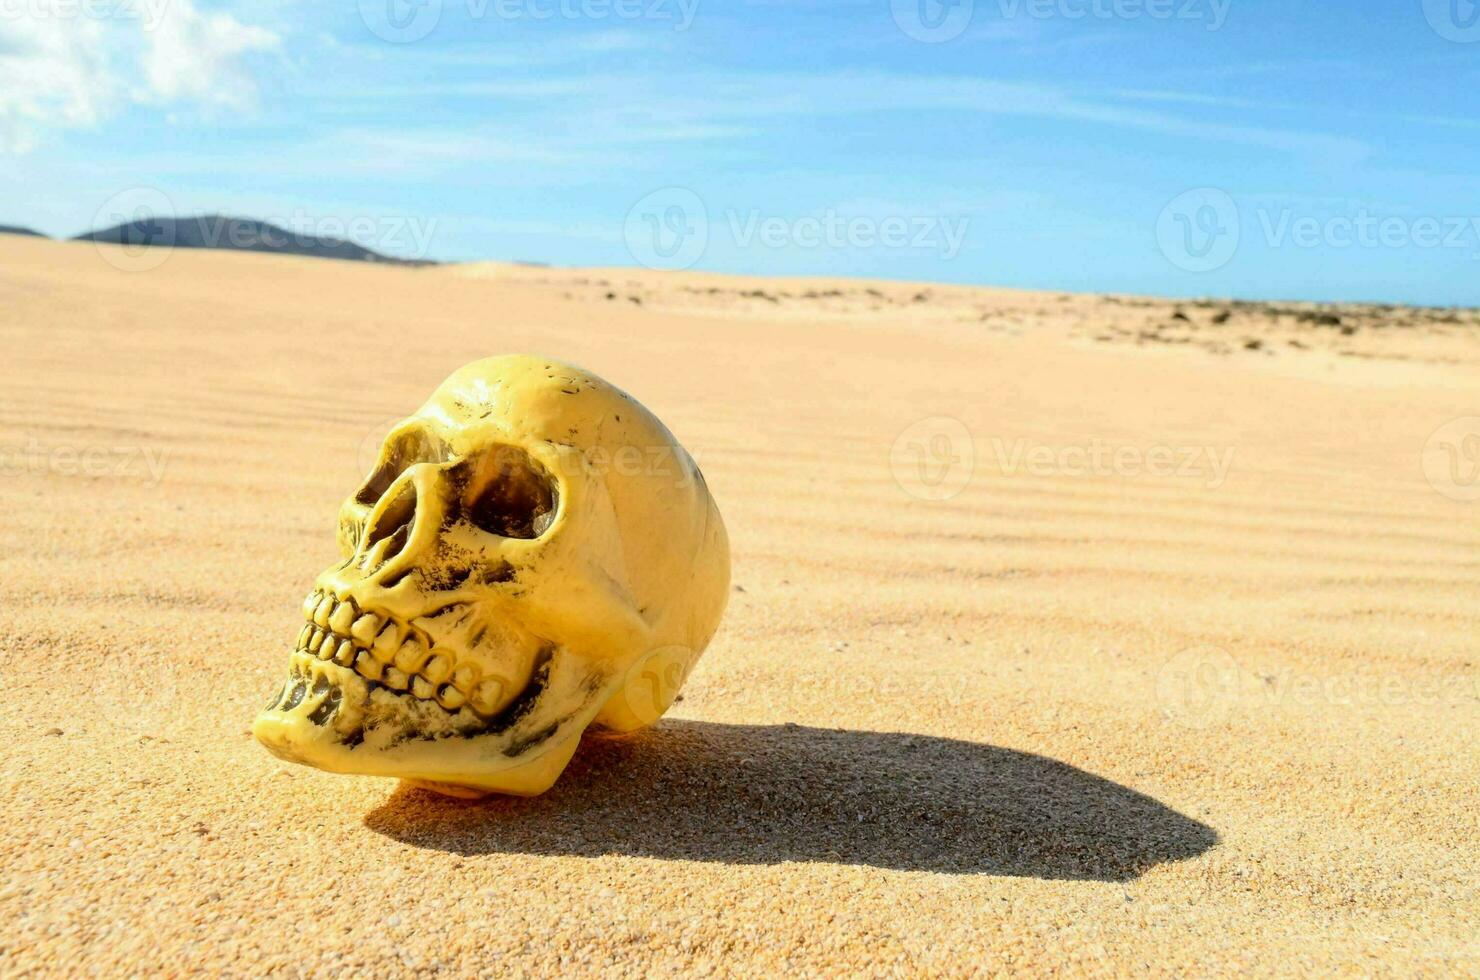 a skull sitting in the sand on a desert photo